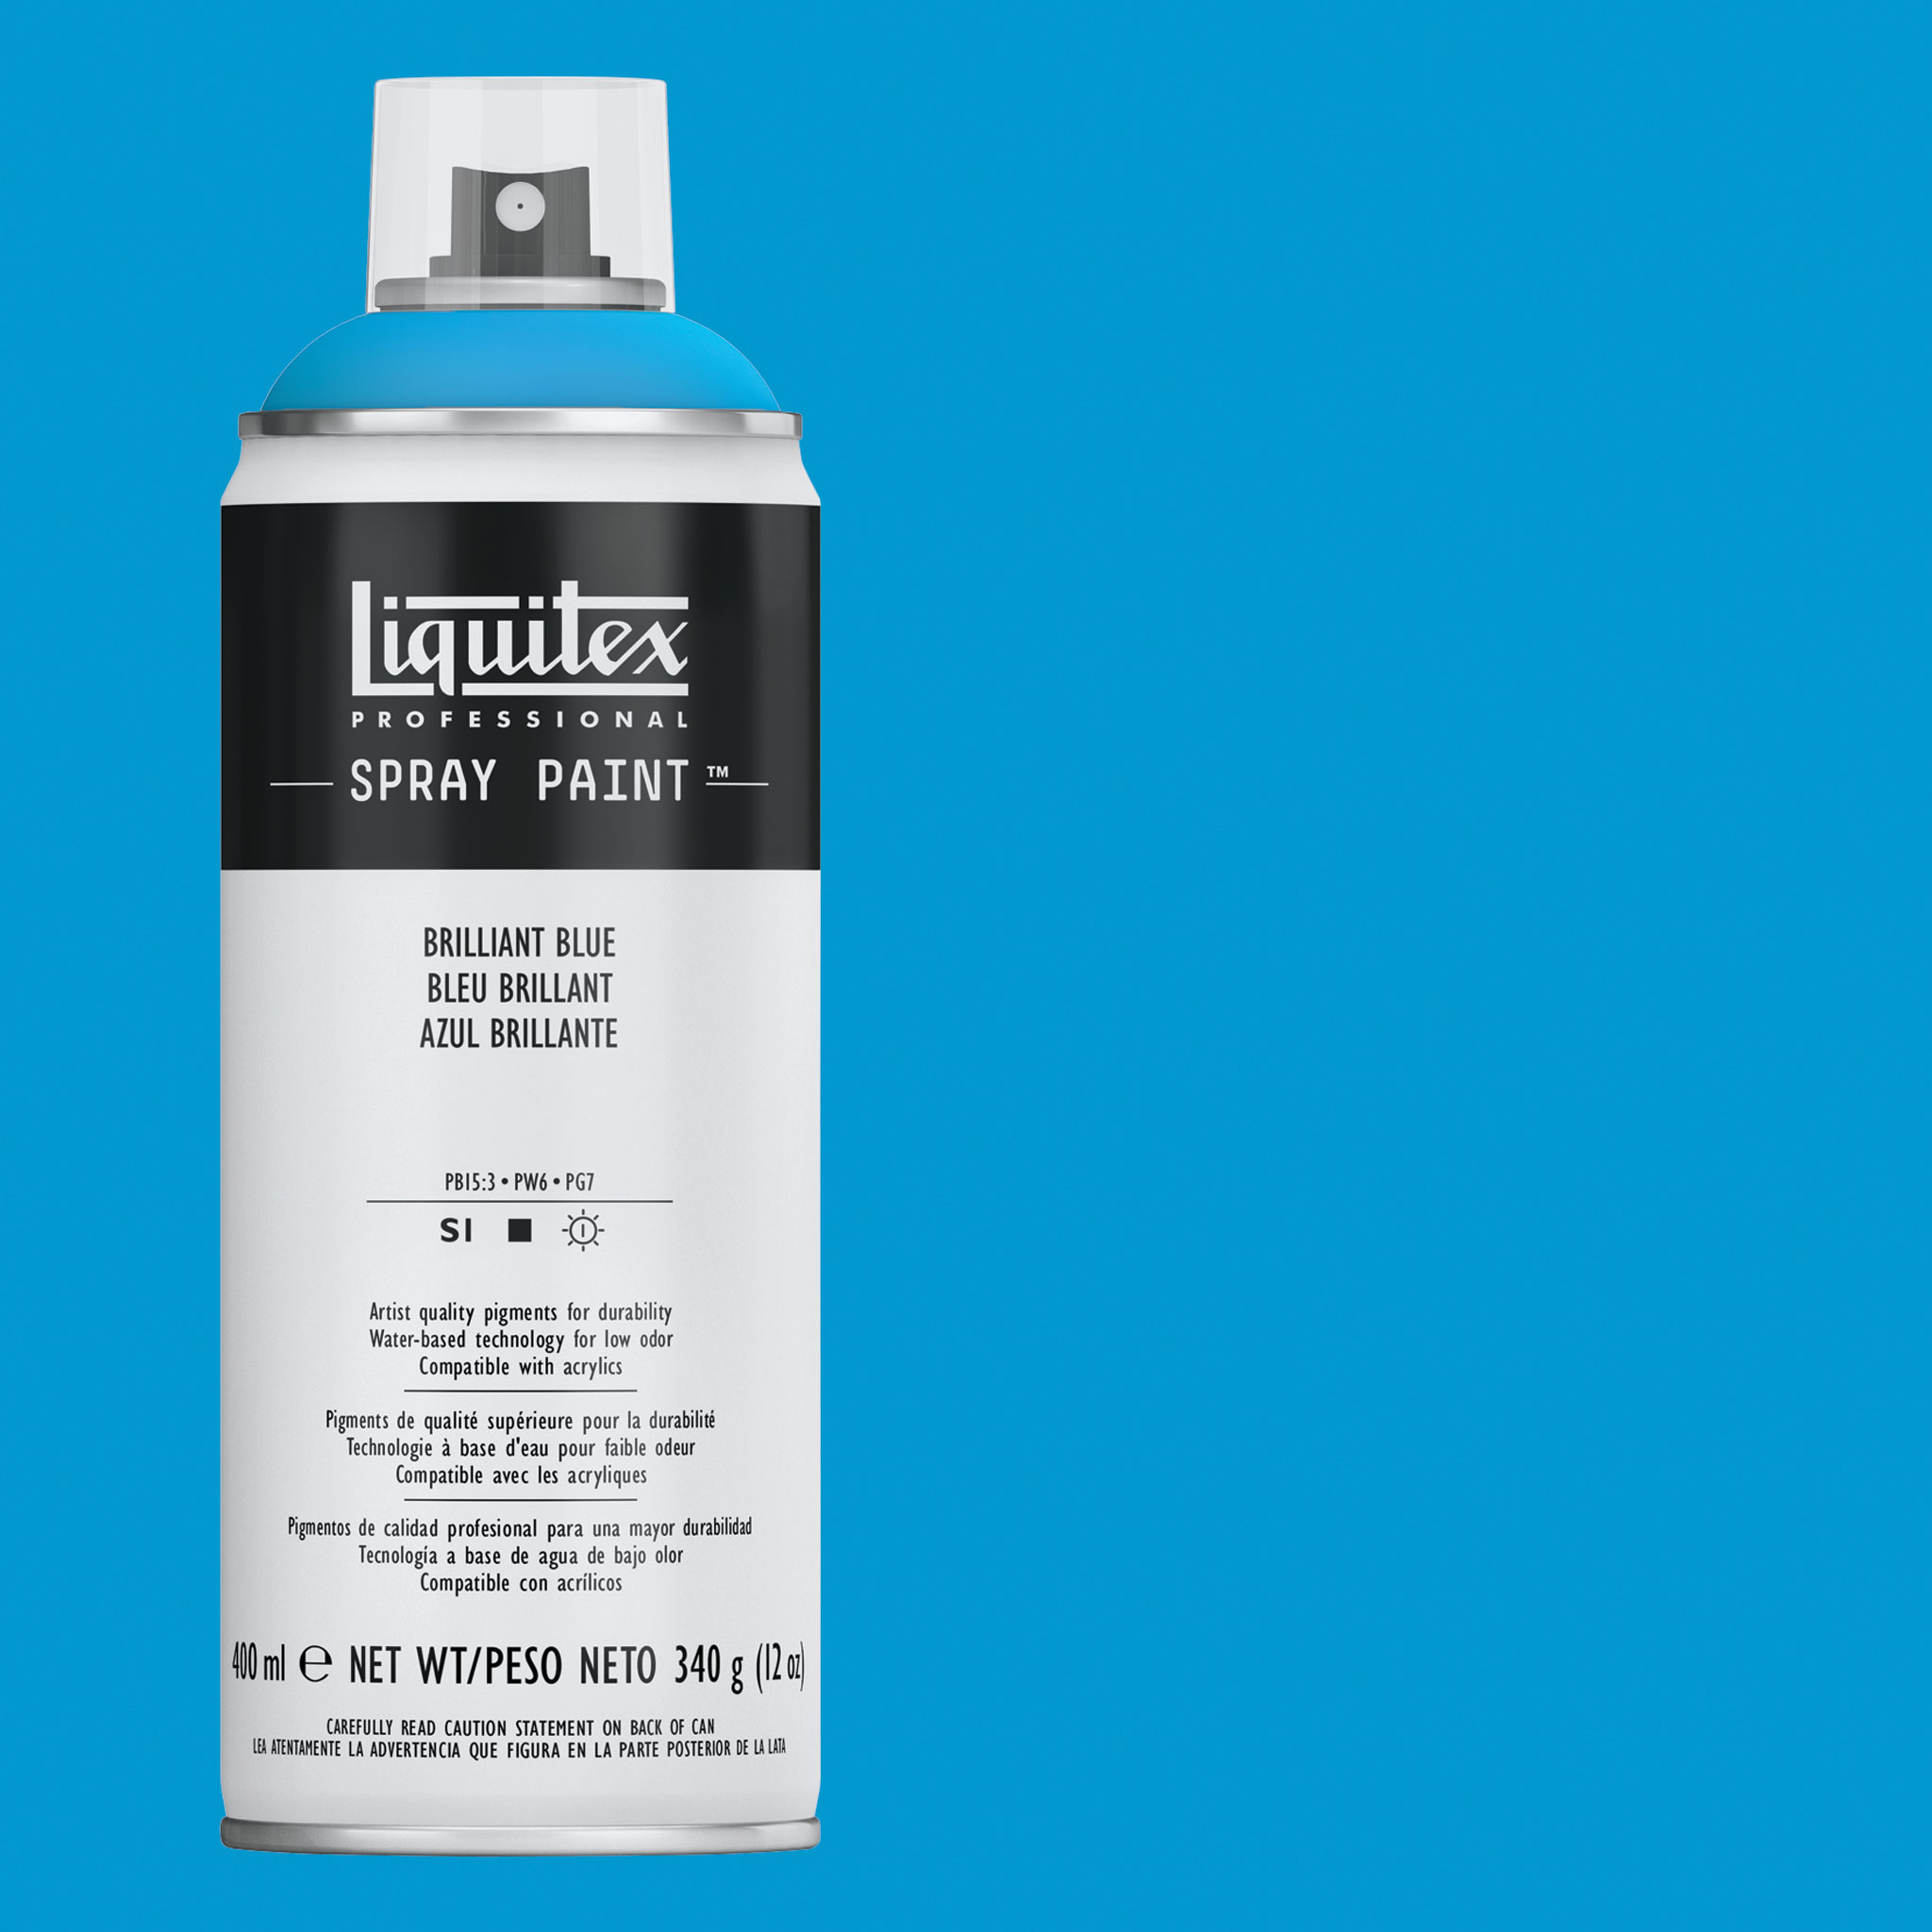 Liquitex Uncapped: How are acrylic mediums made?